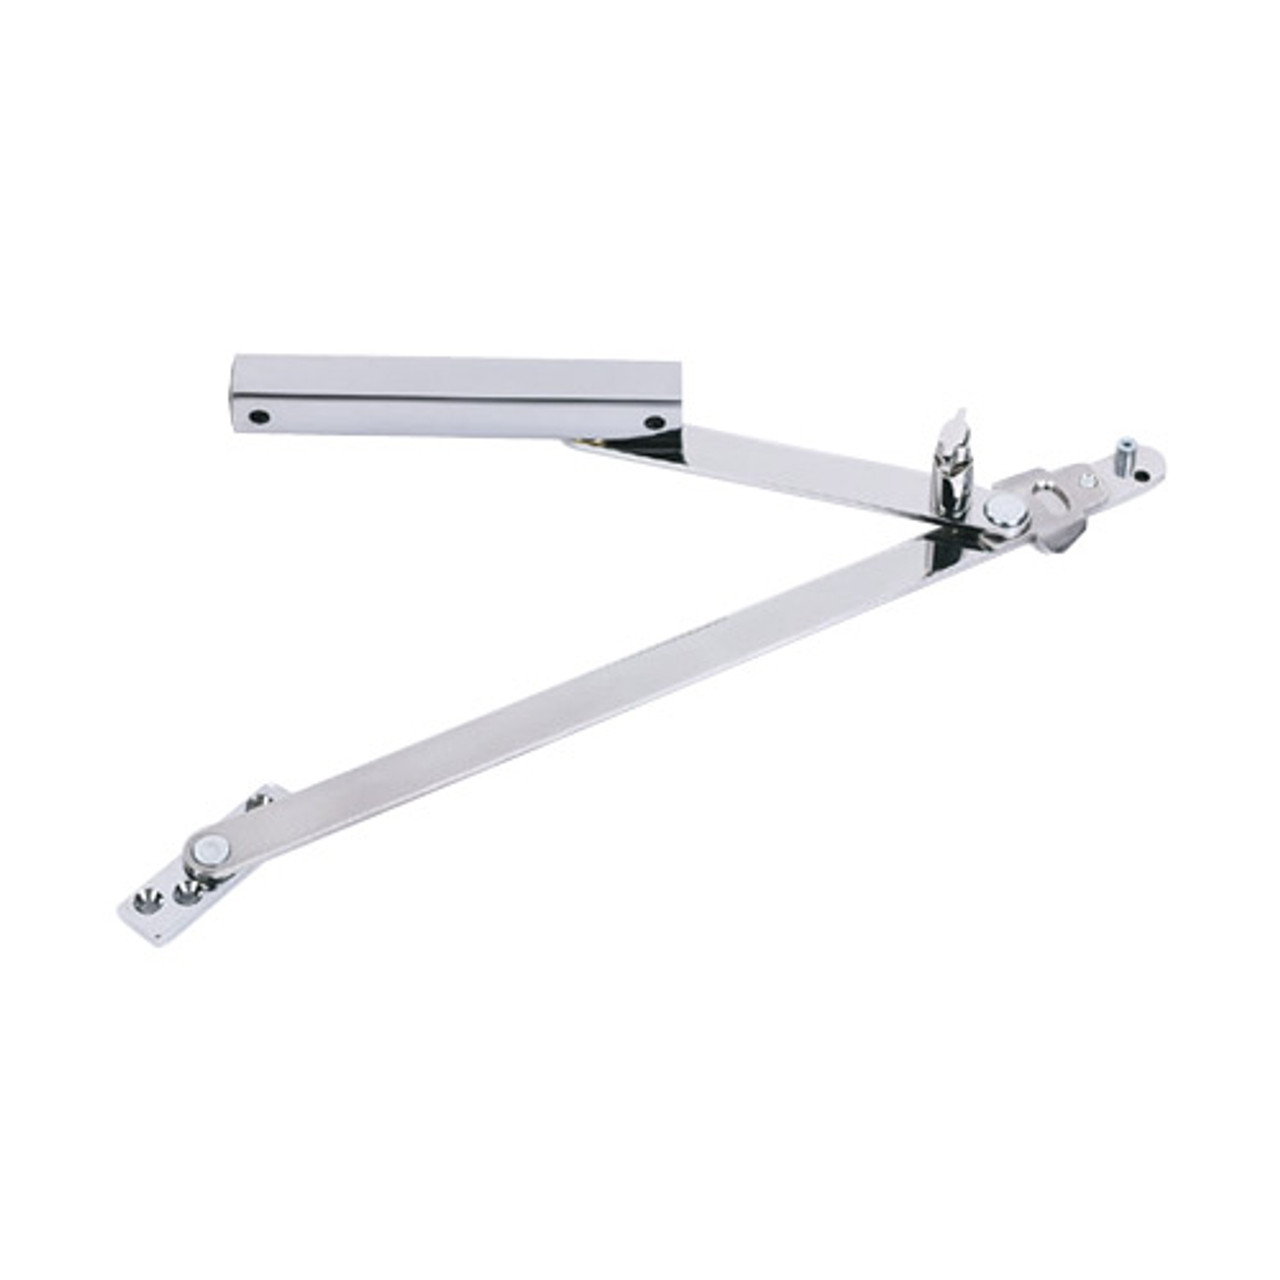 813S-US32 Glynn-Johnson 81 Series Heavy Duty Surface Overhead in Bright Stainless Steel